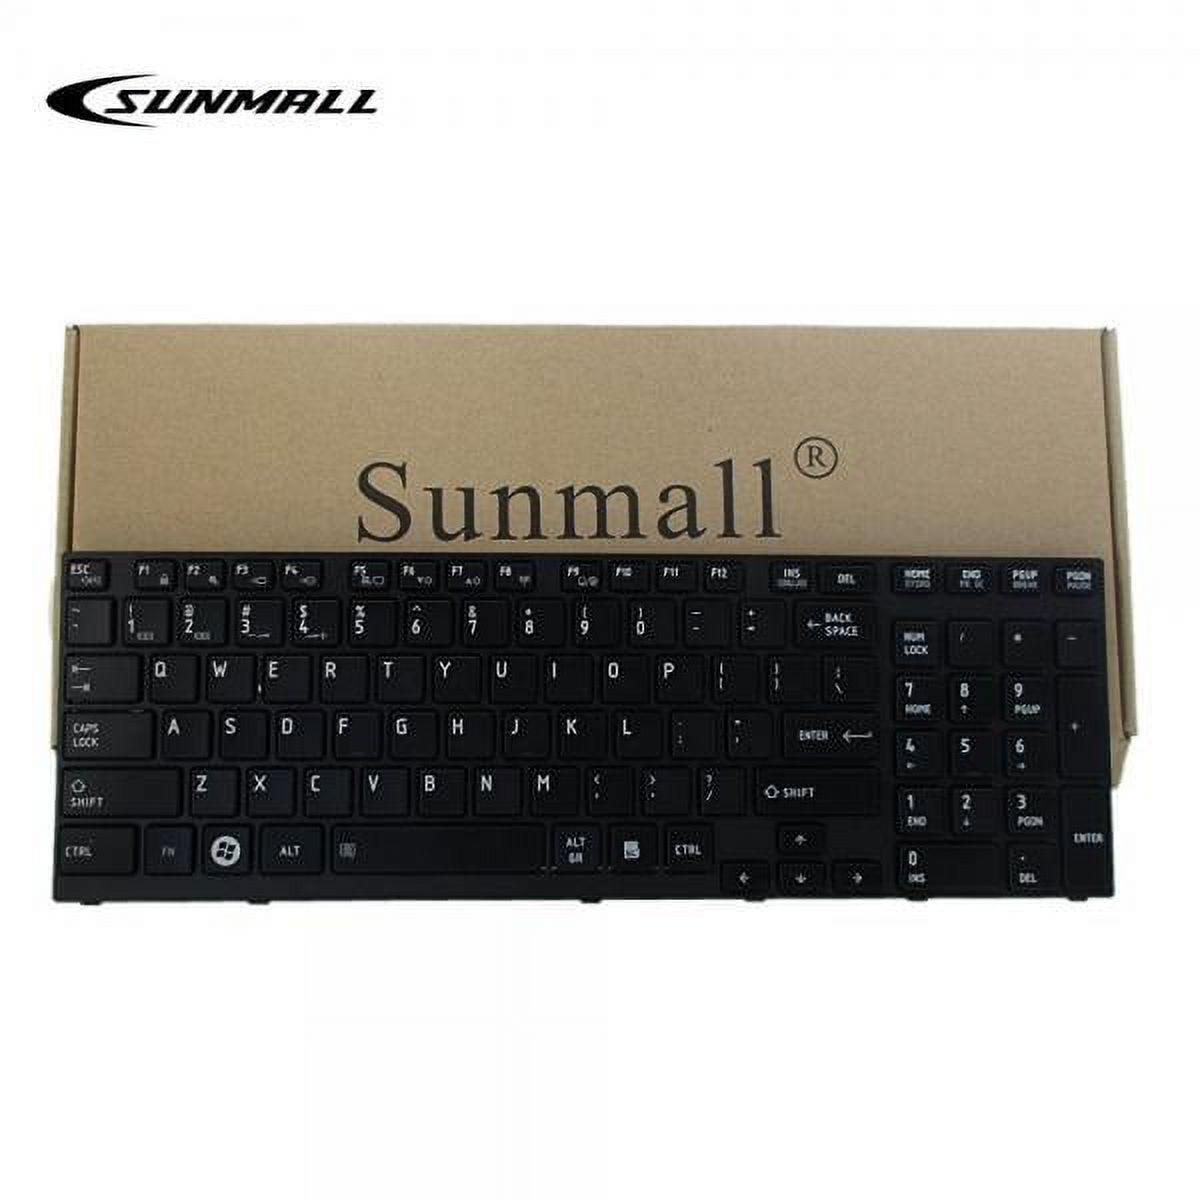 p755 keyboard replacement, sunmall laptop keyboard replacement for toshiba satellite p750 p750d p755 p755-s5320 p770 p770d p775 p775-s7215 series us layout 6 months warranty - image 1 of 3